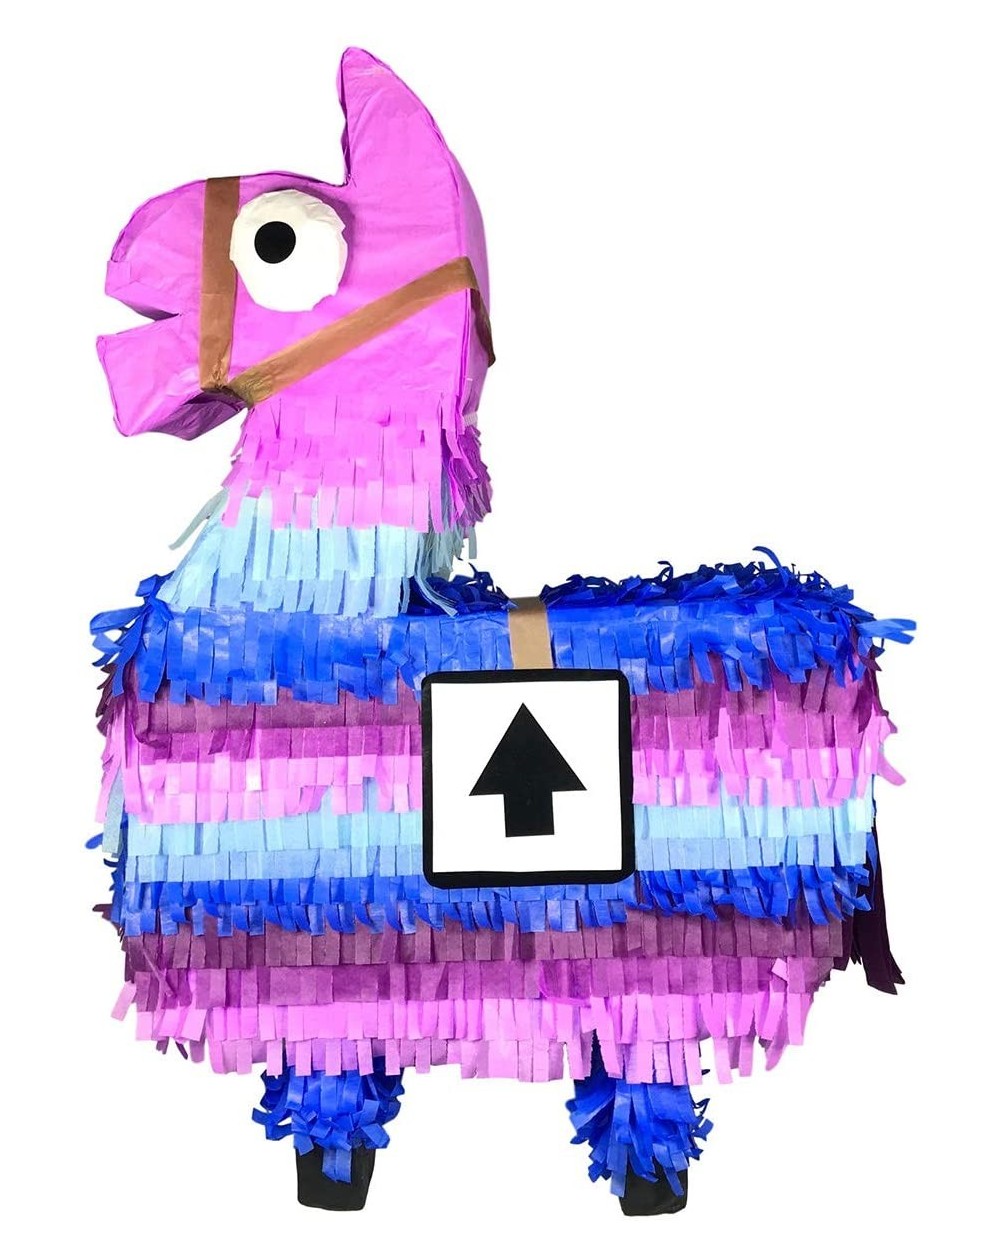 Piñatas Purple Llama Pinata for Gamers - Take The Loot and Make Your Party The Hit of The Year - CX18XZD32MG $24.58